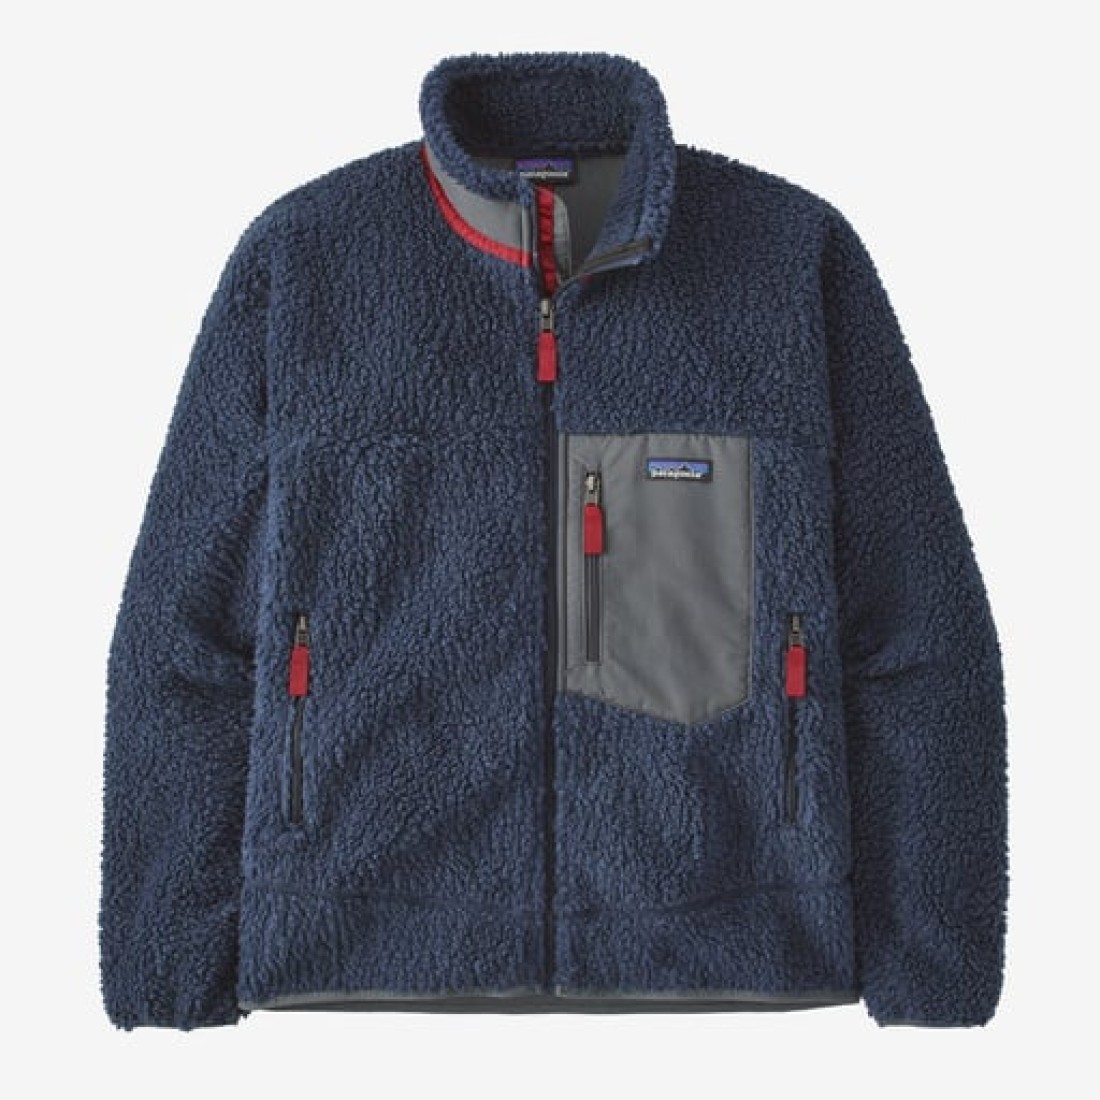 M's Classic Retro X Jkt New Navy Wax Red Patagonia